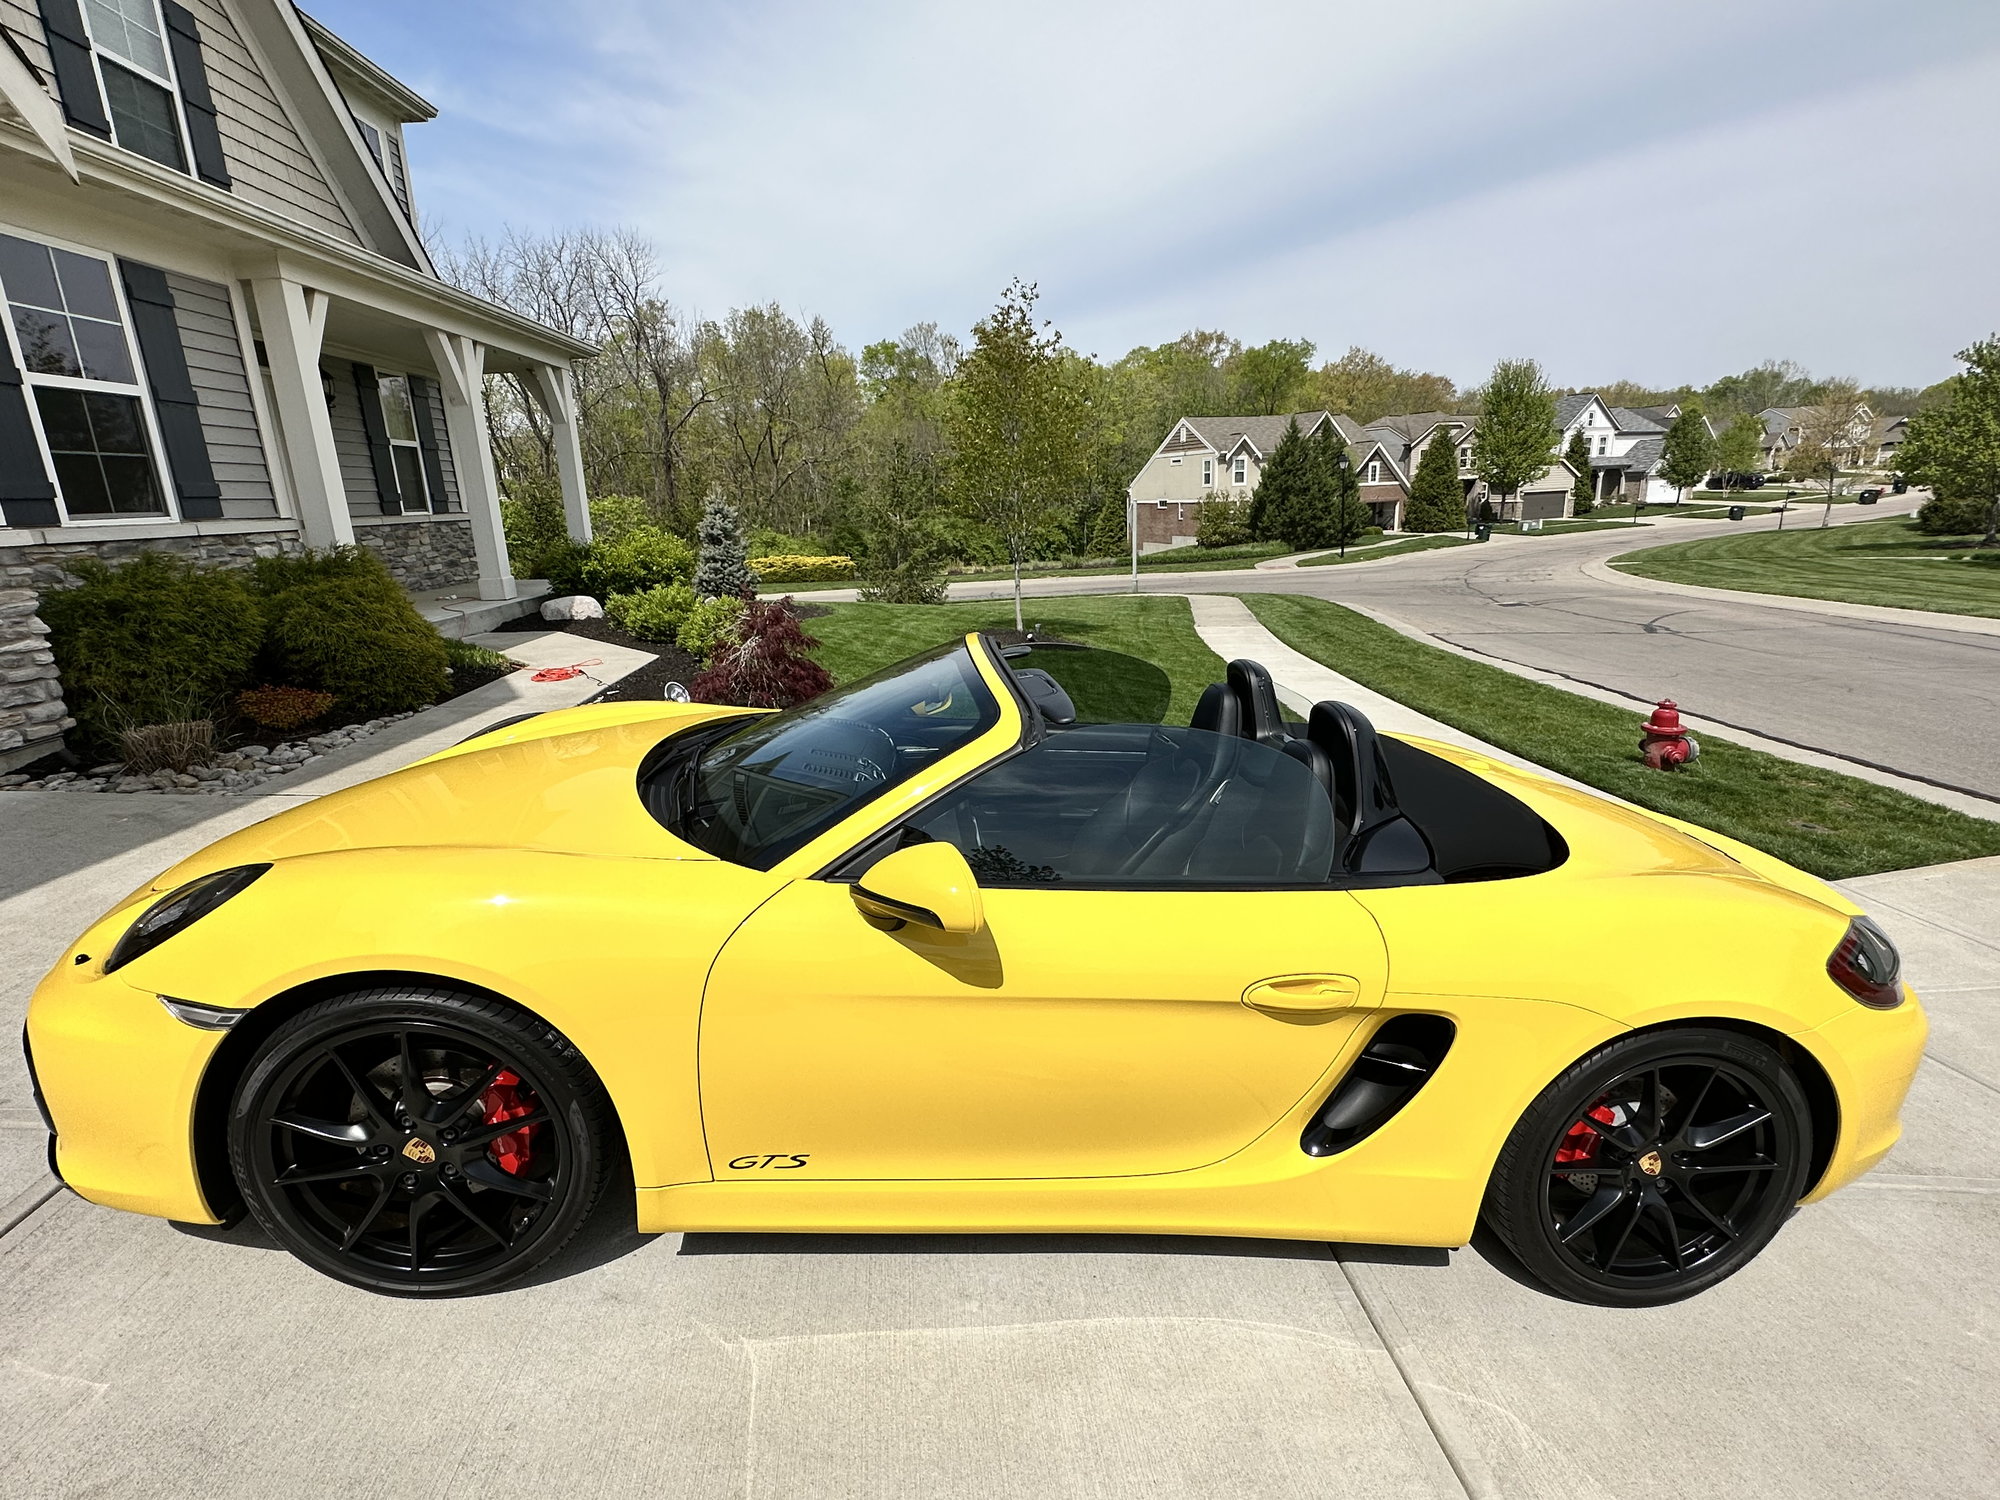 2015 Porsche Boxster - 981 Boxster GTS (2015) For Sale - Used - VIN WP0CB2A81FS140465 - 34,638 Miles - 6 cyl - 2WD - Automatic - Convertible - Yellow - Cincinnati, OH 45065, United States